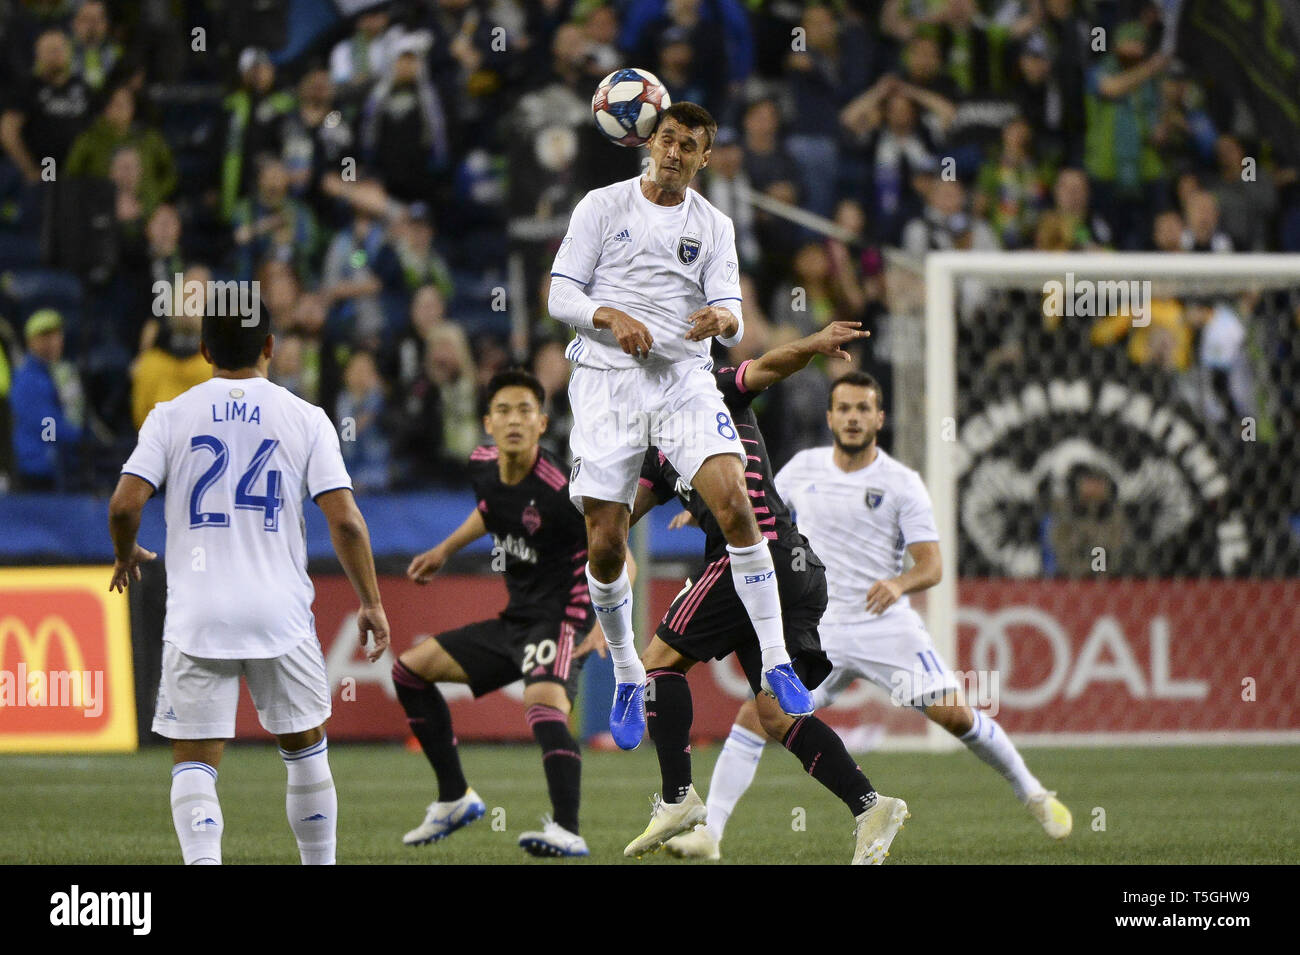 Seattle, Washington, USA. 24th Apr, 2019. Chris Wondolowski (8) goes up for a ball as the San Jose Earthquakes visit the Seattle Sounders in a MLS match at Century Link Field in Seattle, WA. Credit: Jeff Halstead/ZUMA Wire/Alamy Live News Stock Photo